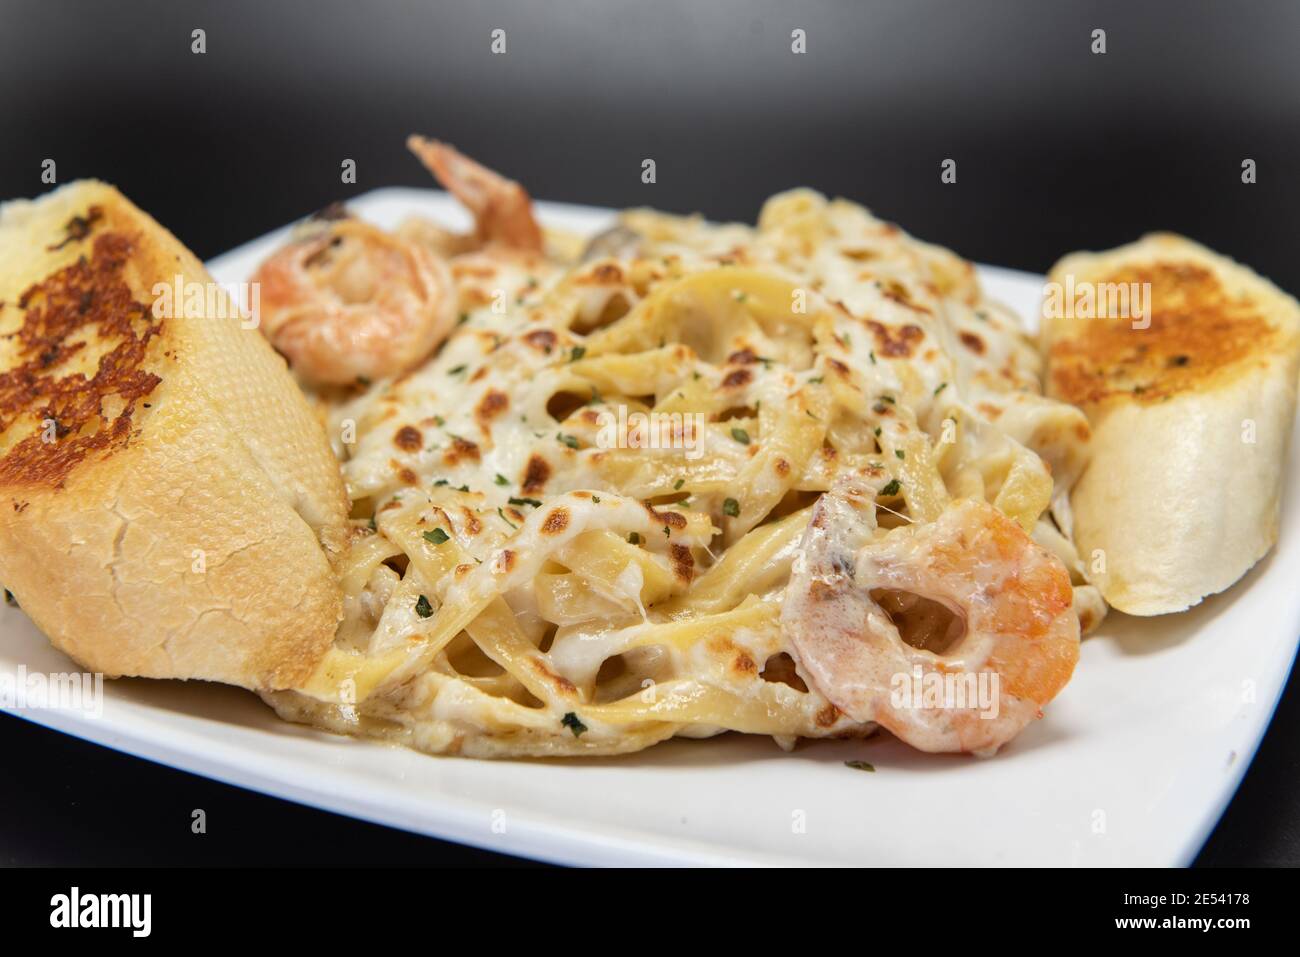 Mexican culinary favorite seafood pasta garnished with garlic bread on a plate. Stock Photo